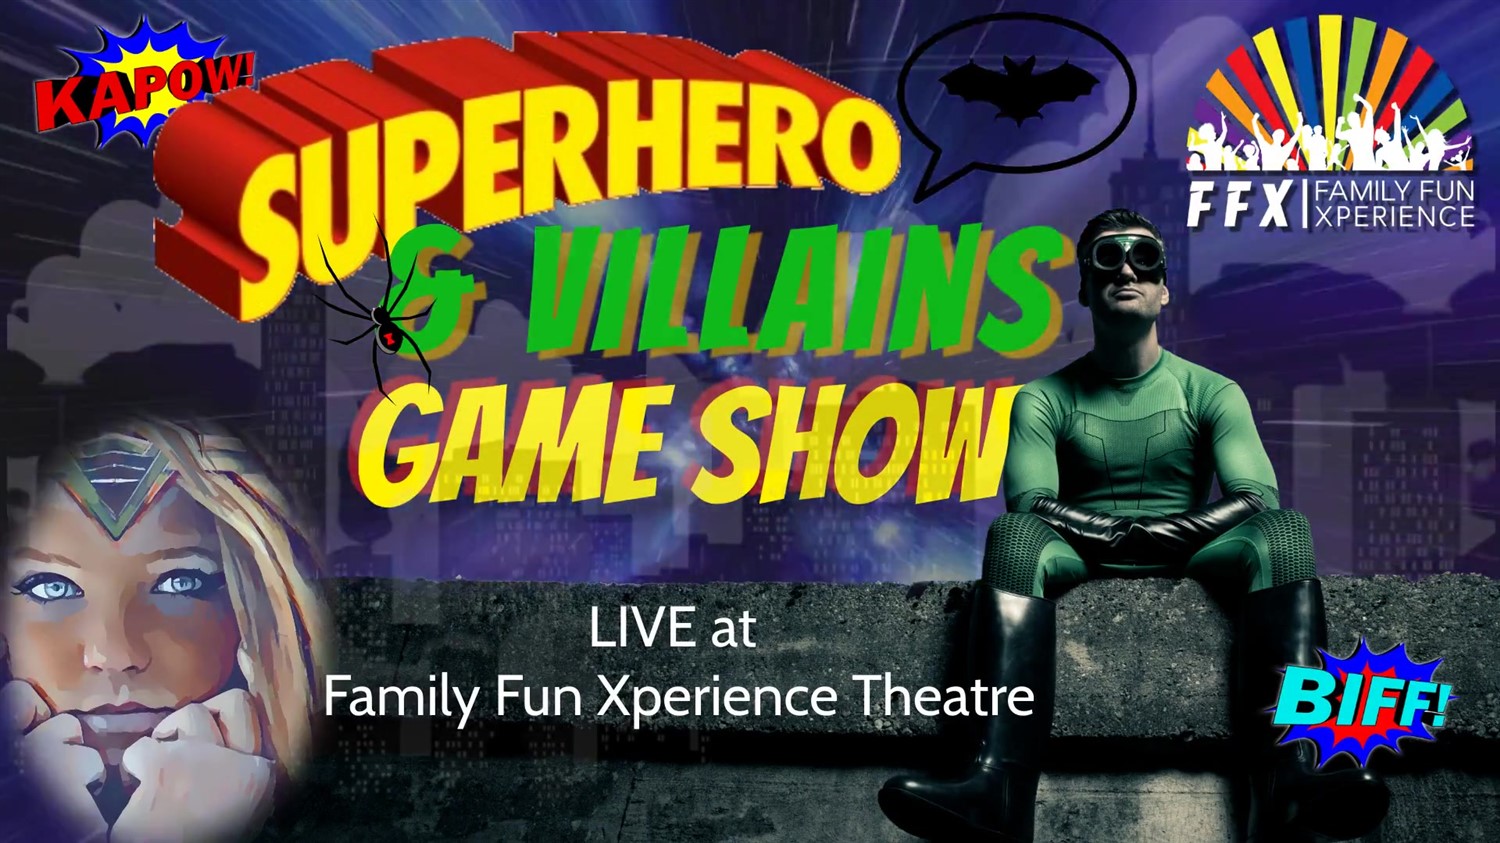 Superheroes & Villains: LIVE GAME SHOW  on Jan 27, 19:00@FFX Theatre - Pick a seat, Buy tickets and Get information on Family Fun Xperience tickets.ffxshow.org